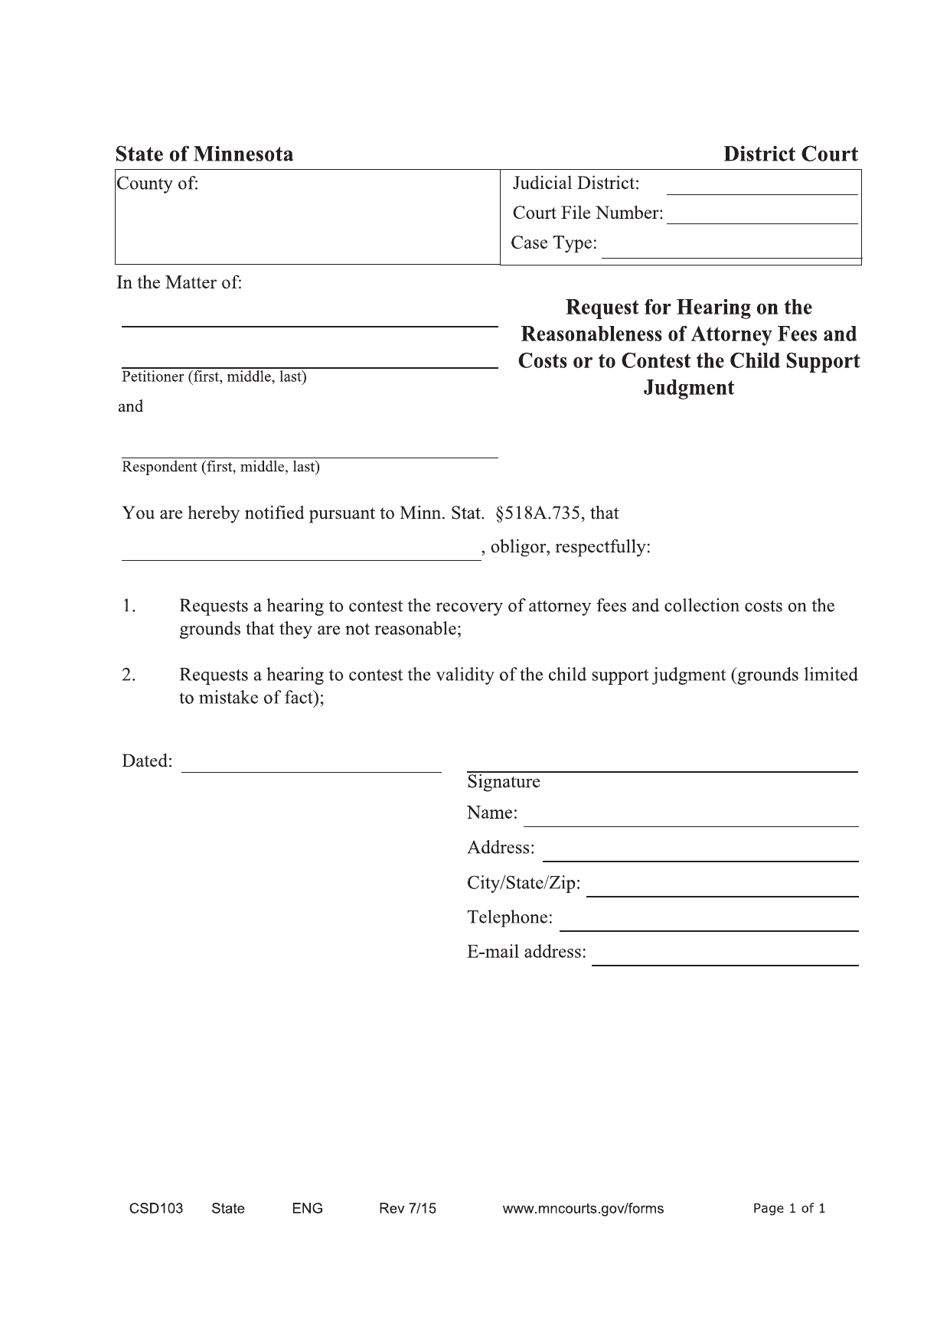 Form CSD103 Request for Hearing on Reasonableness of Attorney Fees - Minnesota, Page 1